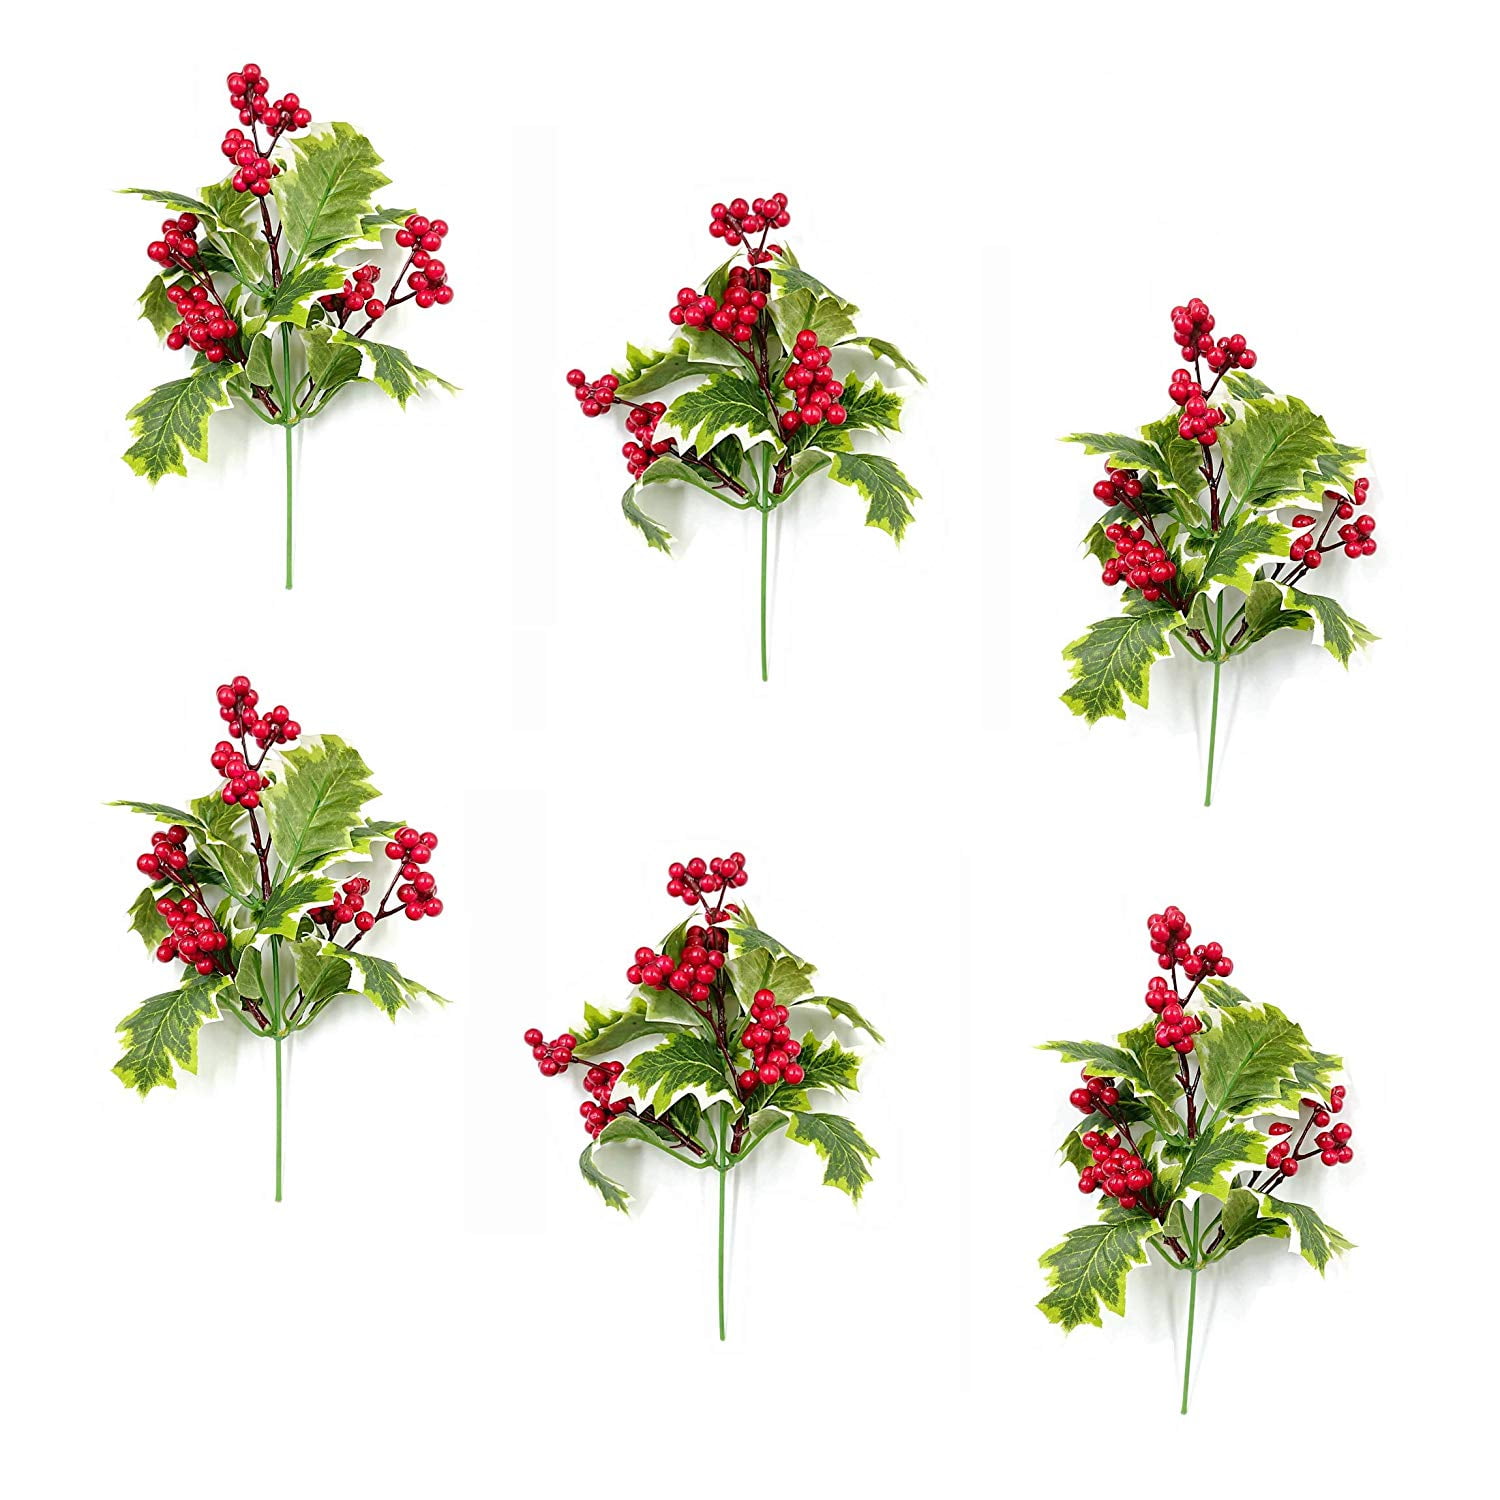 Artificial Xmas Holly Berries on Wire. 50 Stems RED PLASTIC BERRY BUNDLE 